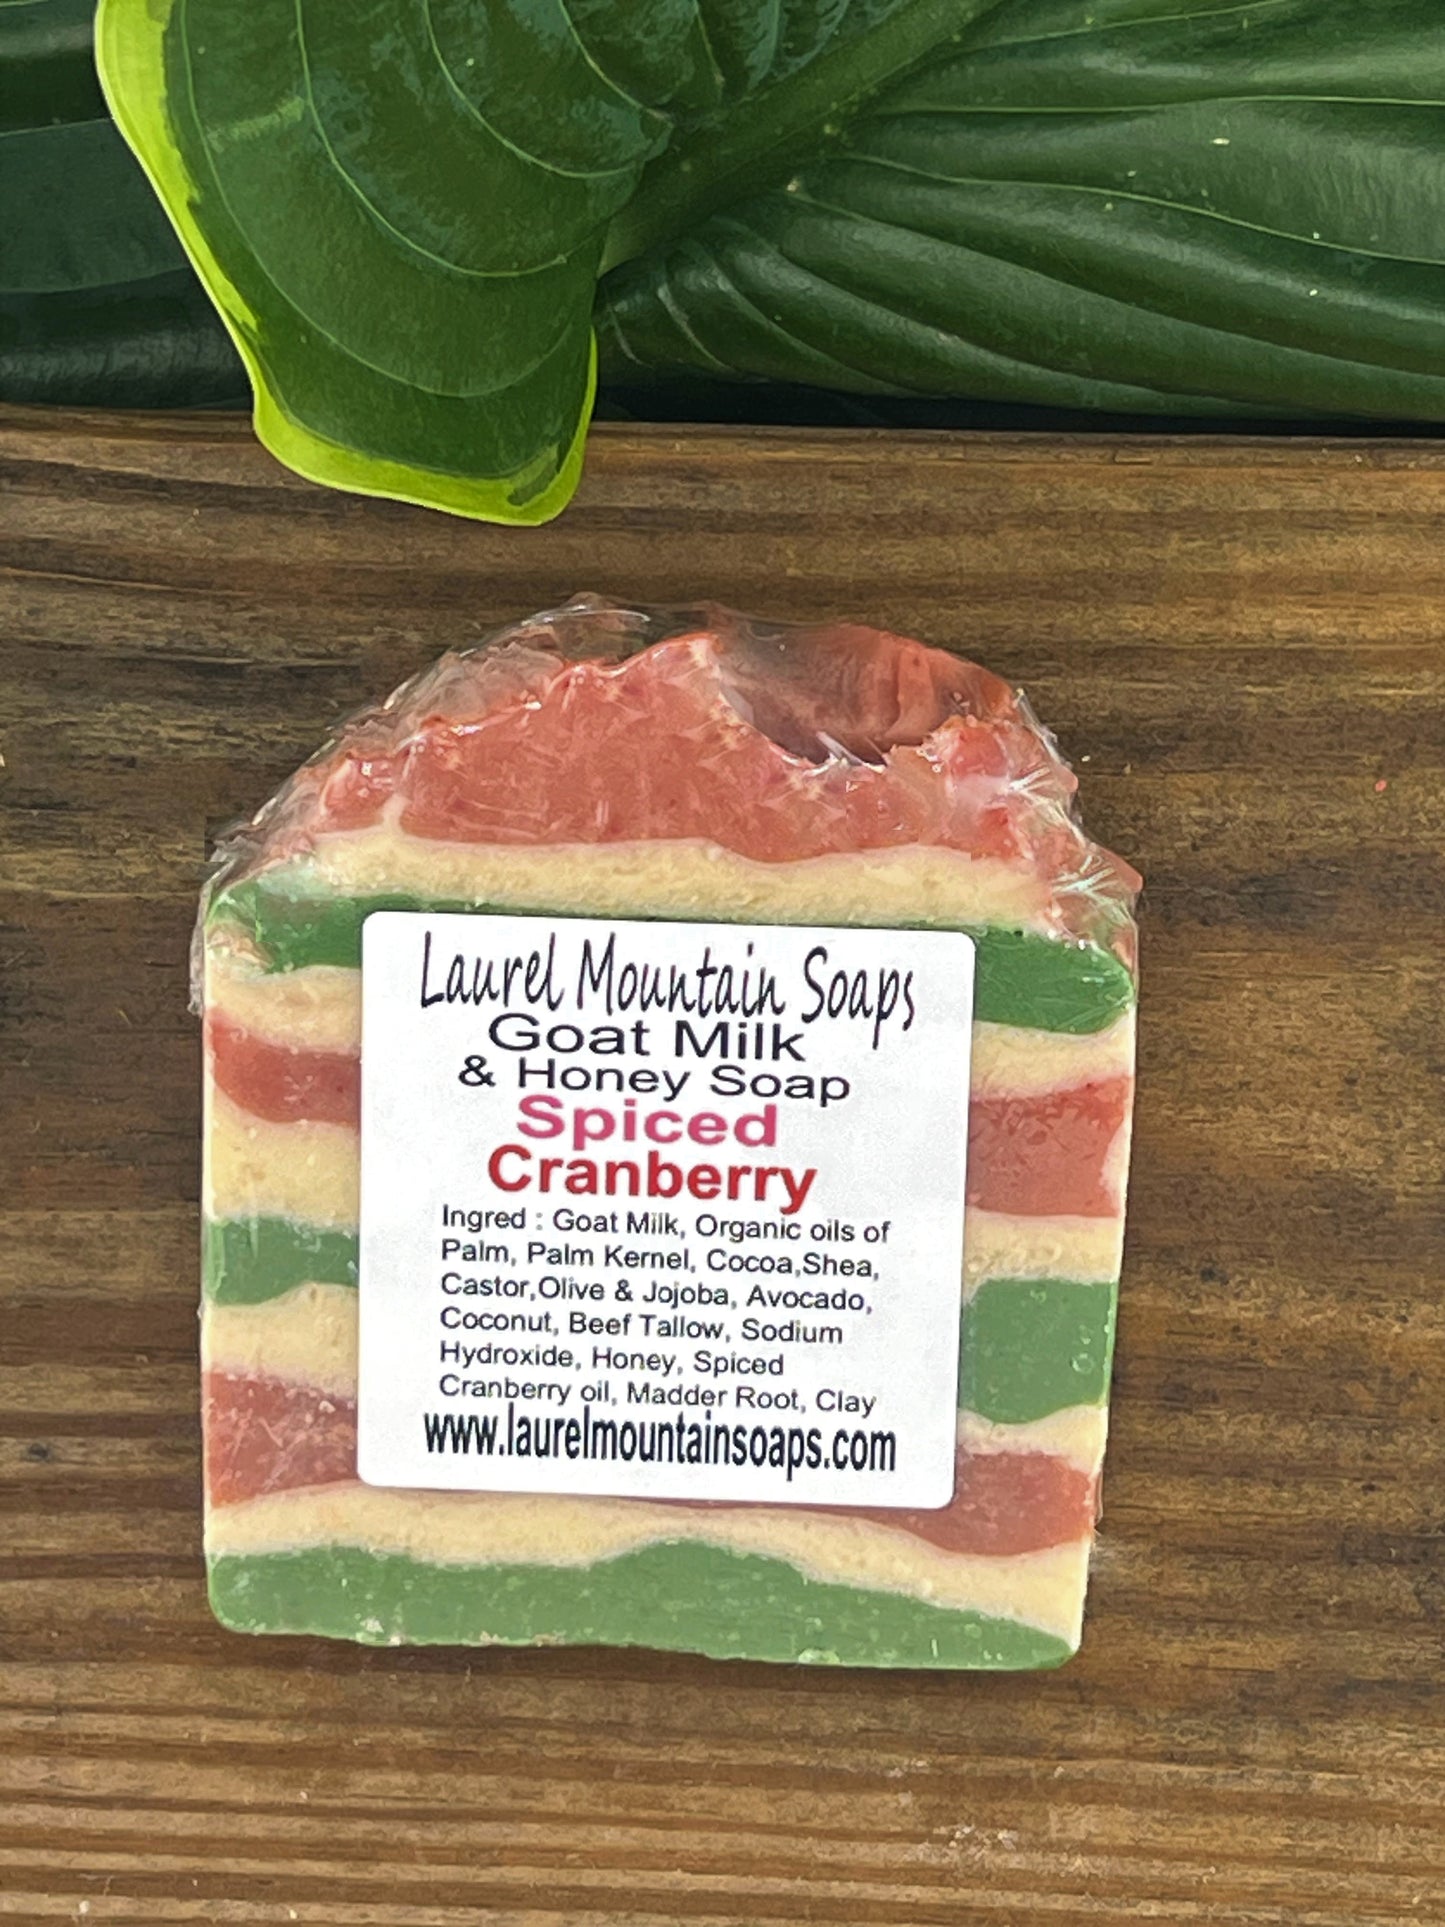 Cranberry Spice Goat Milk and Honey Soap